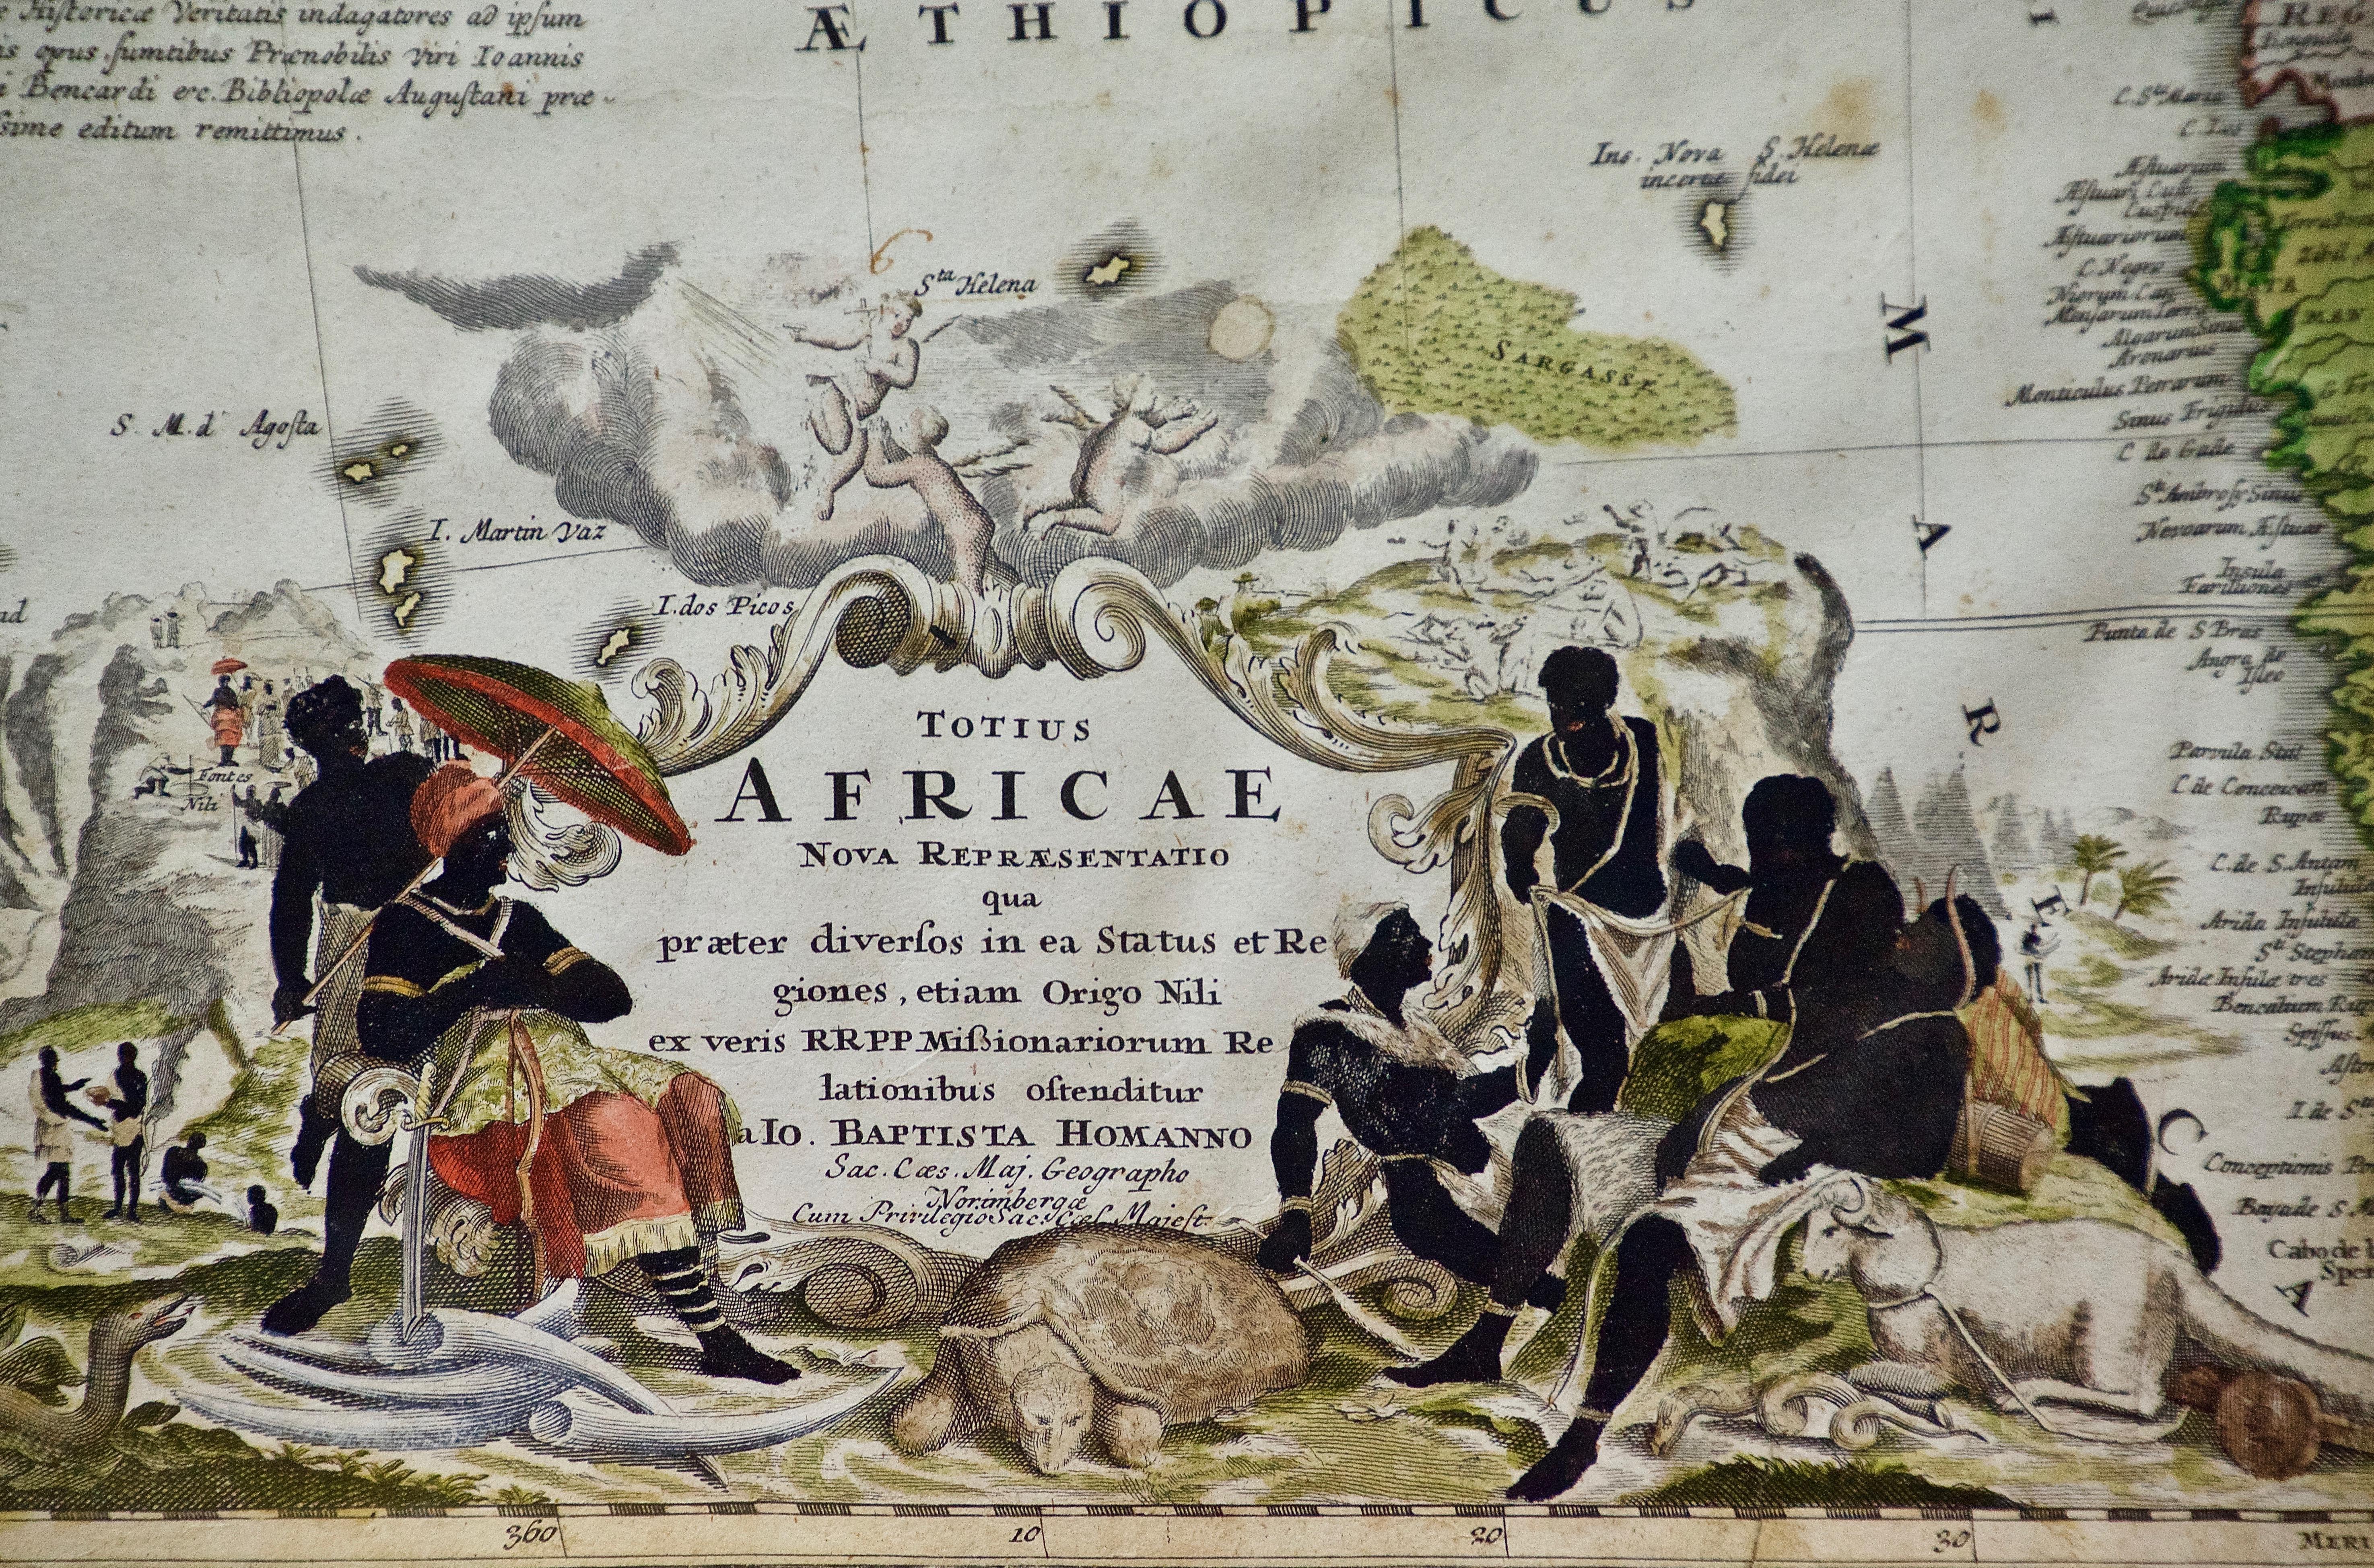 This is a scarce richly hand colored copper plate engraved map of Africa entitled 